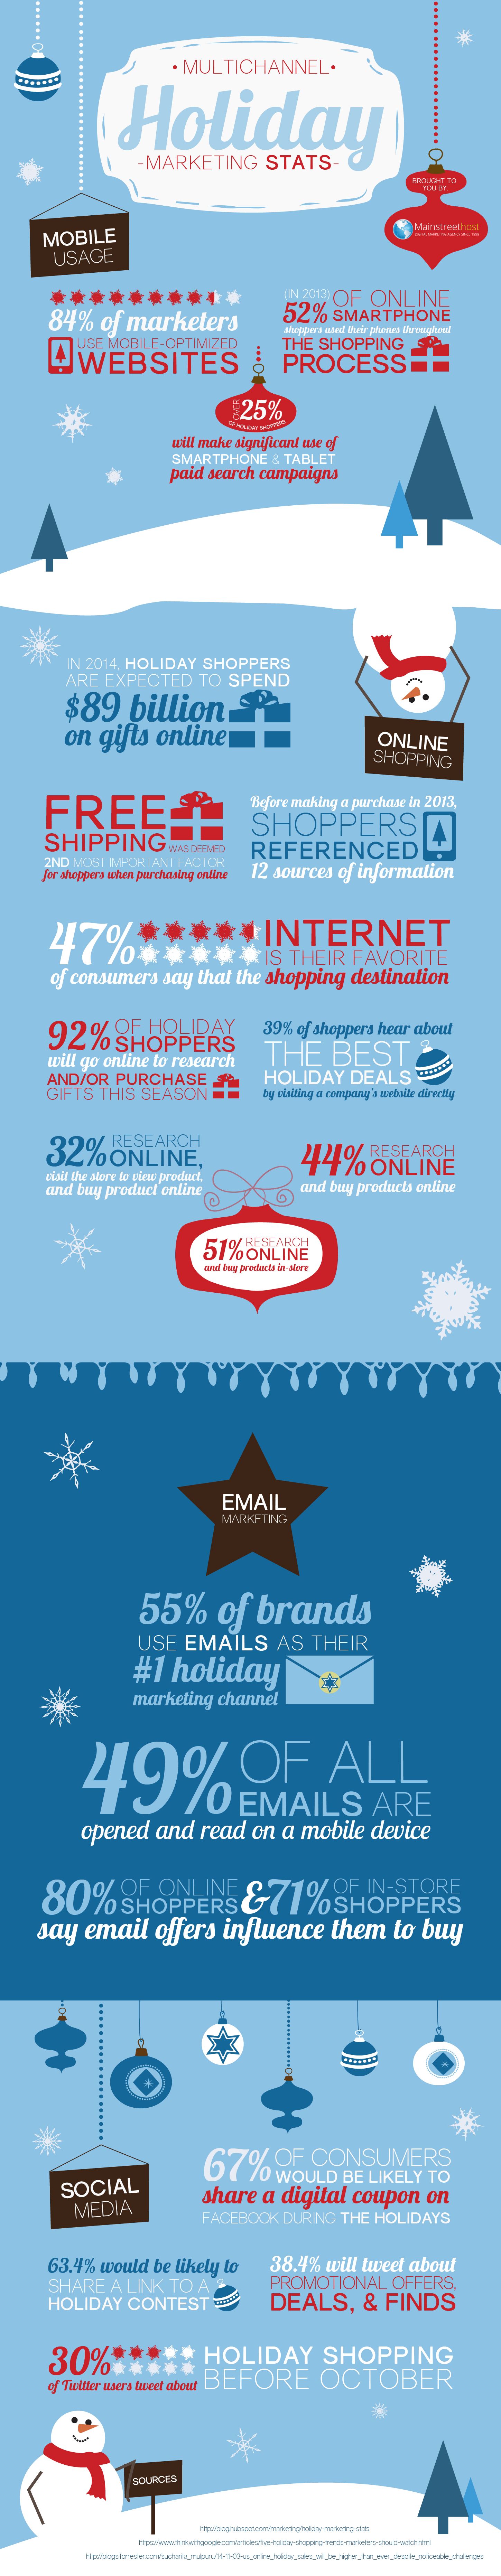 Holiday Marketing Stats Infographic